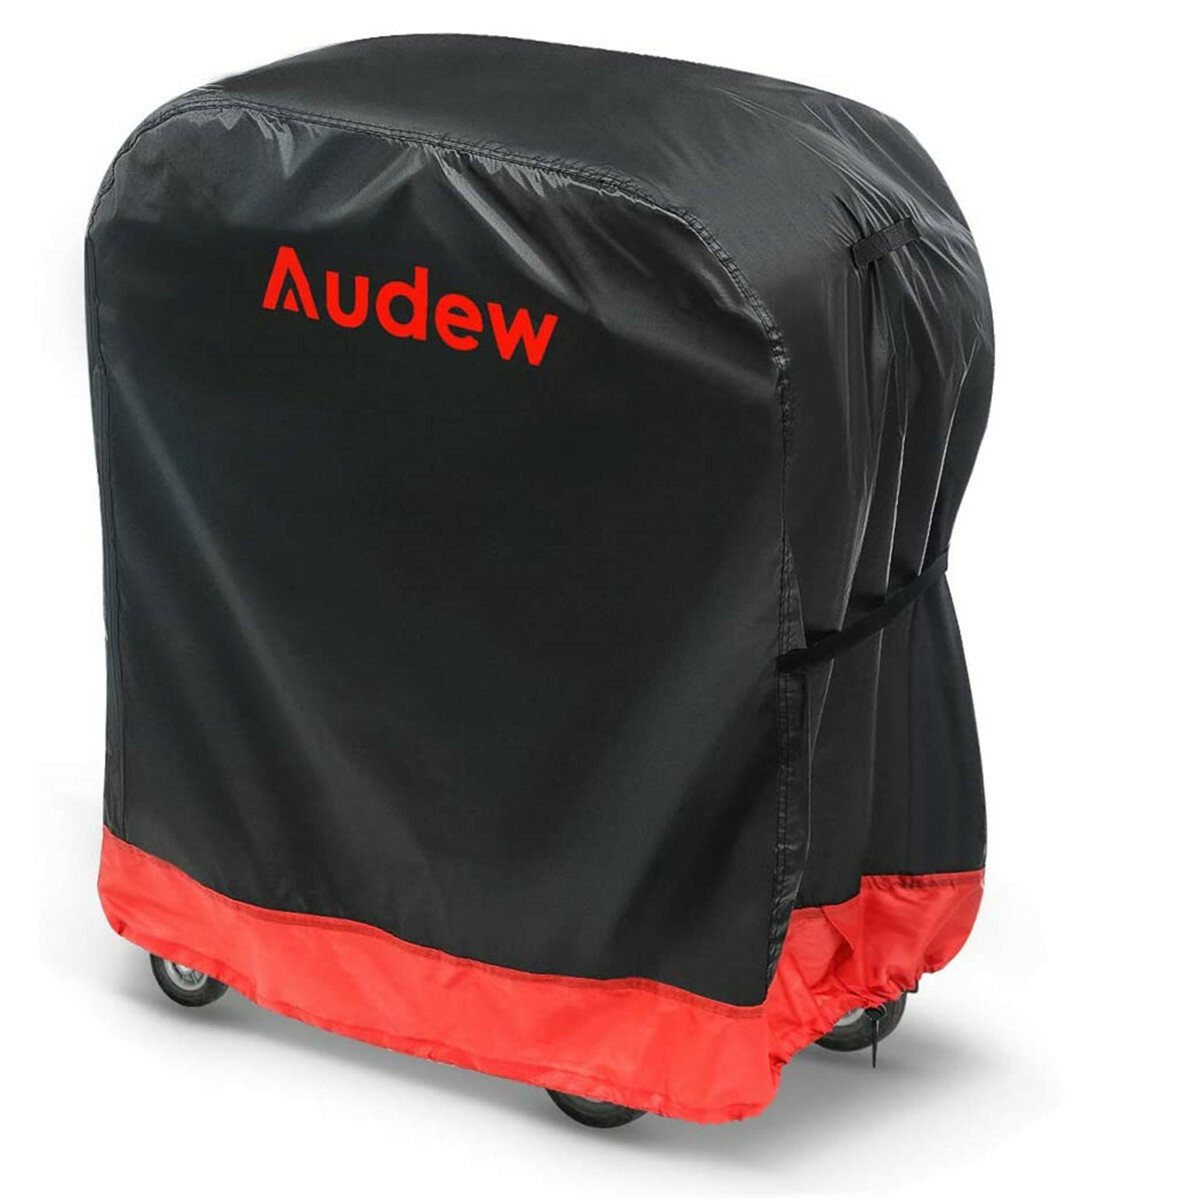 Audew 32-inch BBQ Grill Cover Heavy Duty Waterproof UV-resistant Protection Outdoor